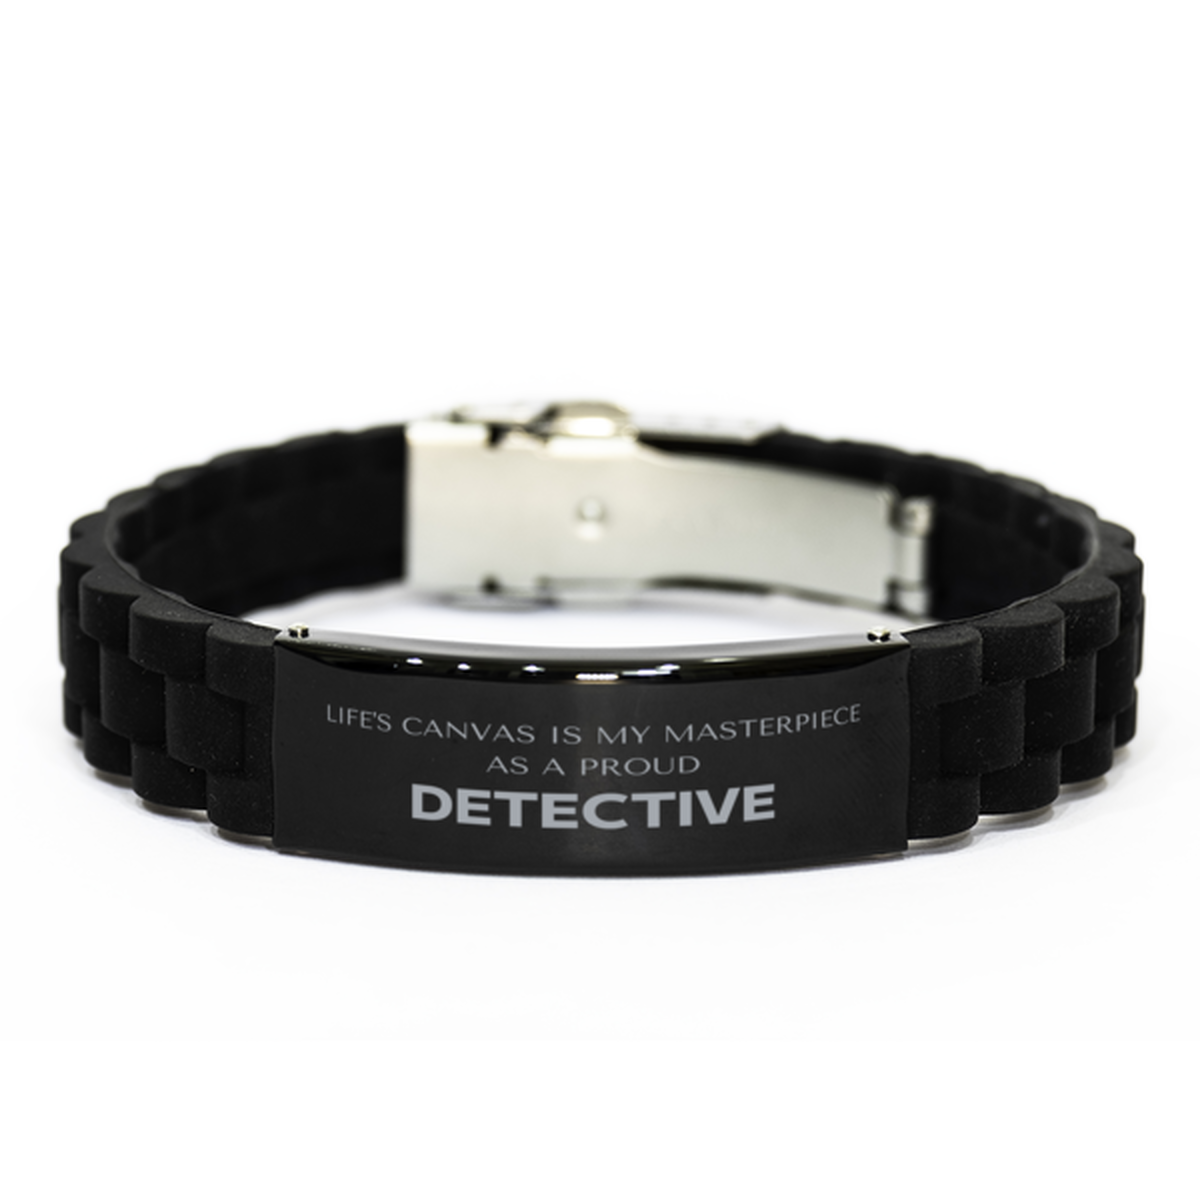 Proud Detective Gifts, Life's canvas is my masterpiece, Epic Birthday Christmas Unique Black Glidelock Clasp Bracelet For Detective, Coworkers, Men, Women, Friends